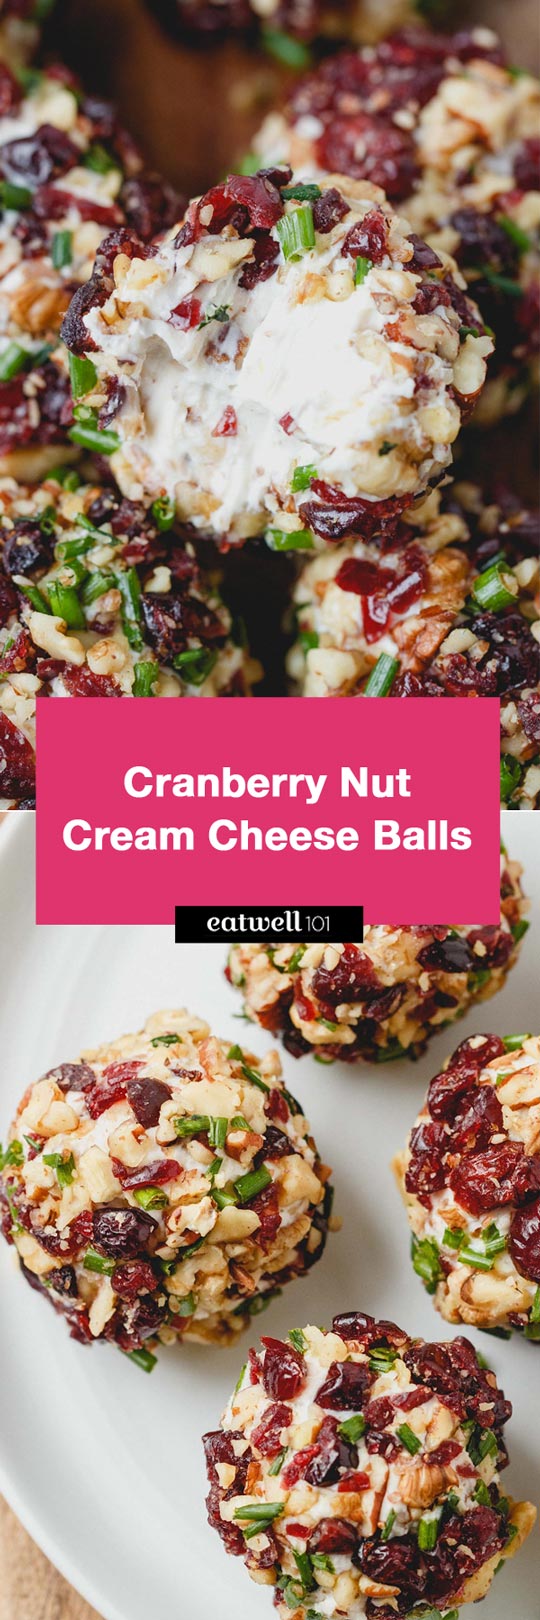 Cranberry Nut Cream Cheese Balls - These super festive cheese balls won't last long on your table - definitely a crowd pleaser! 